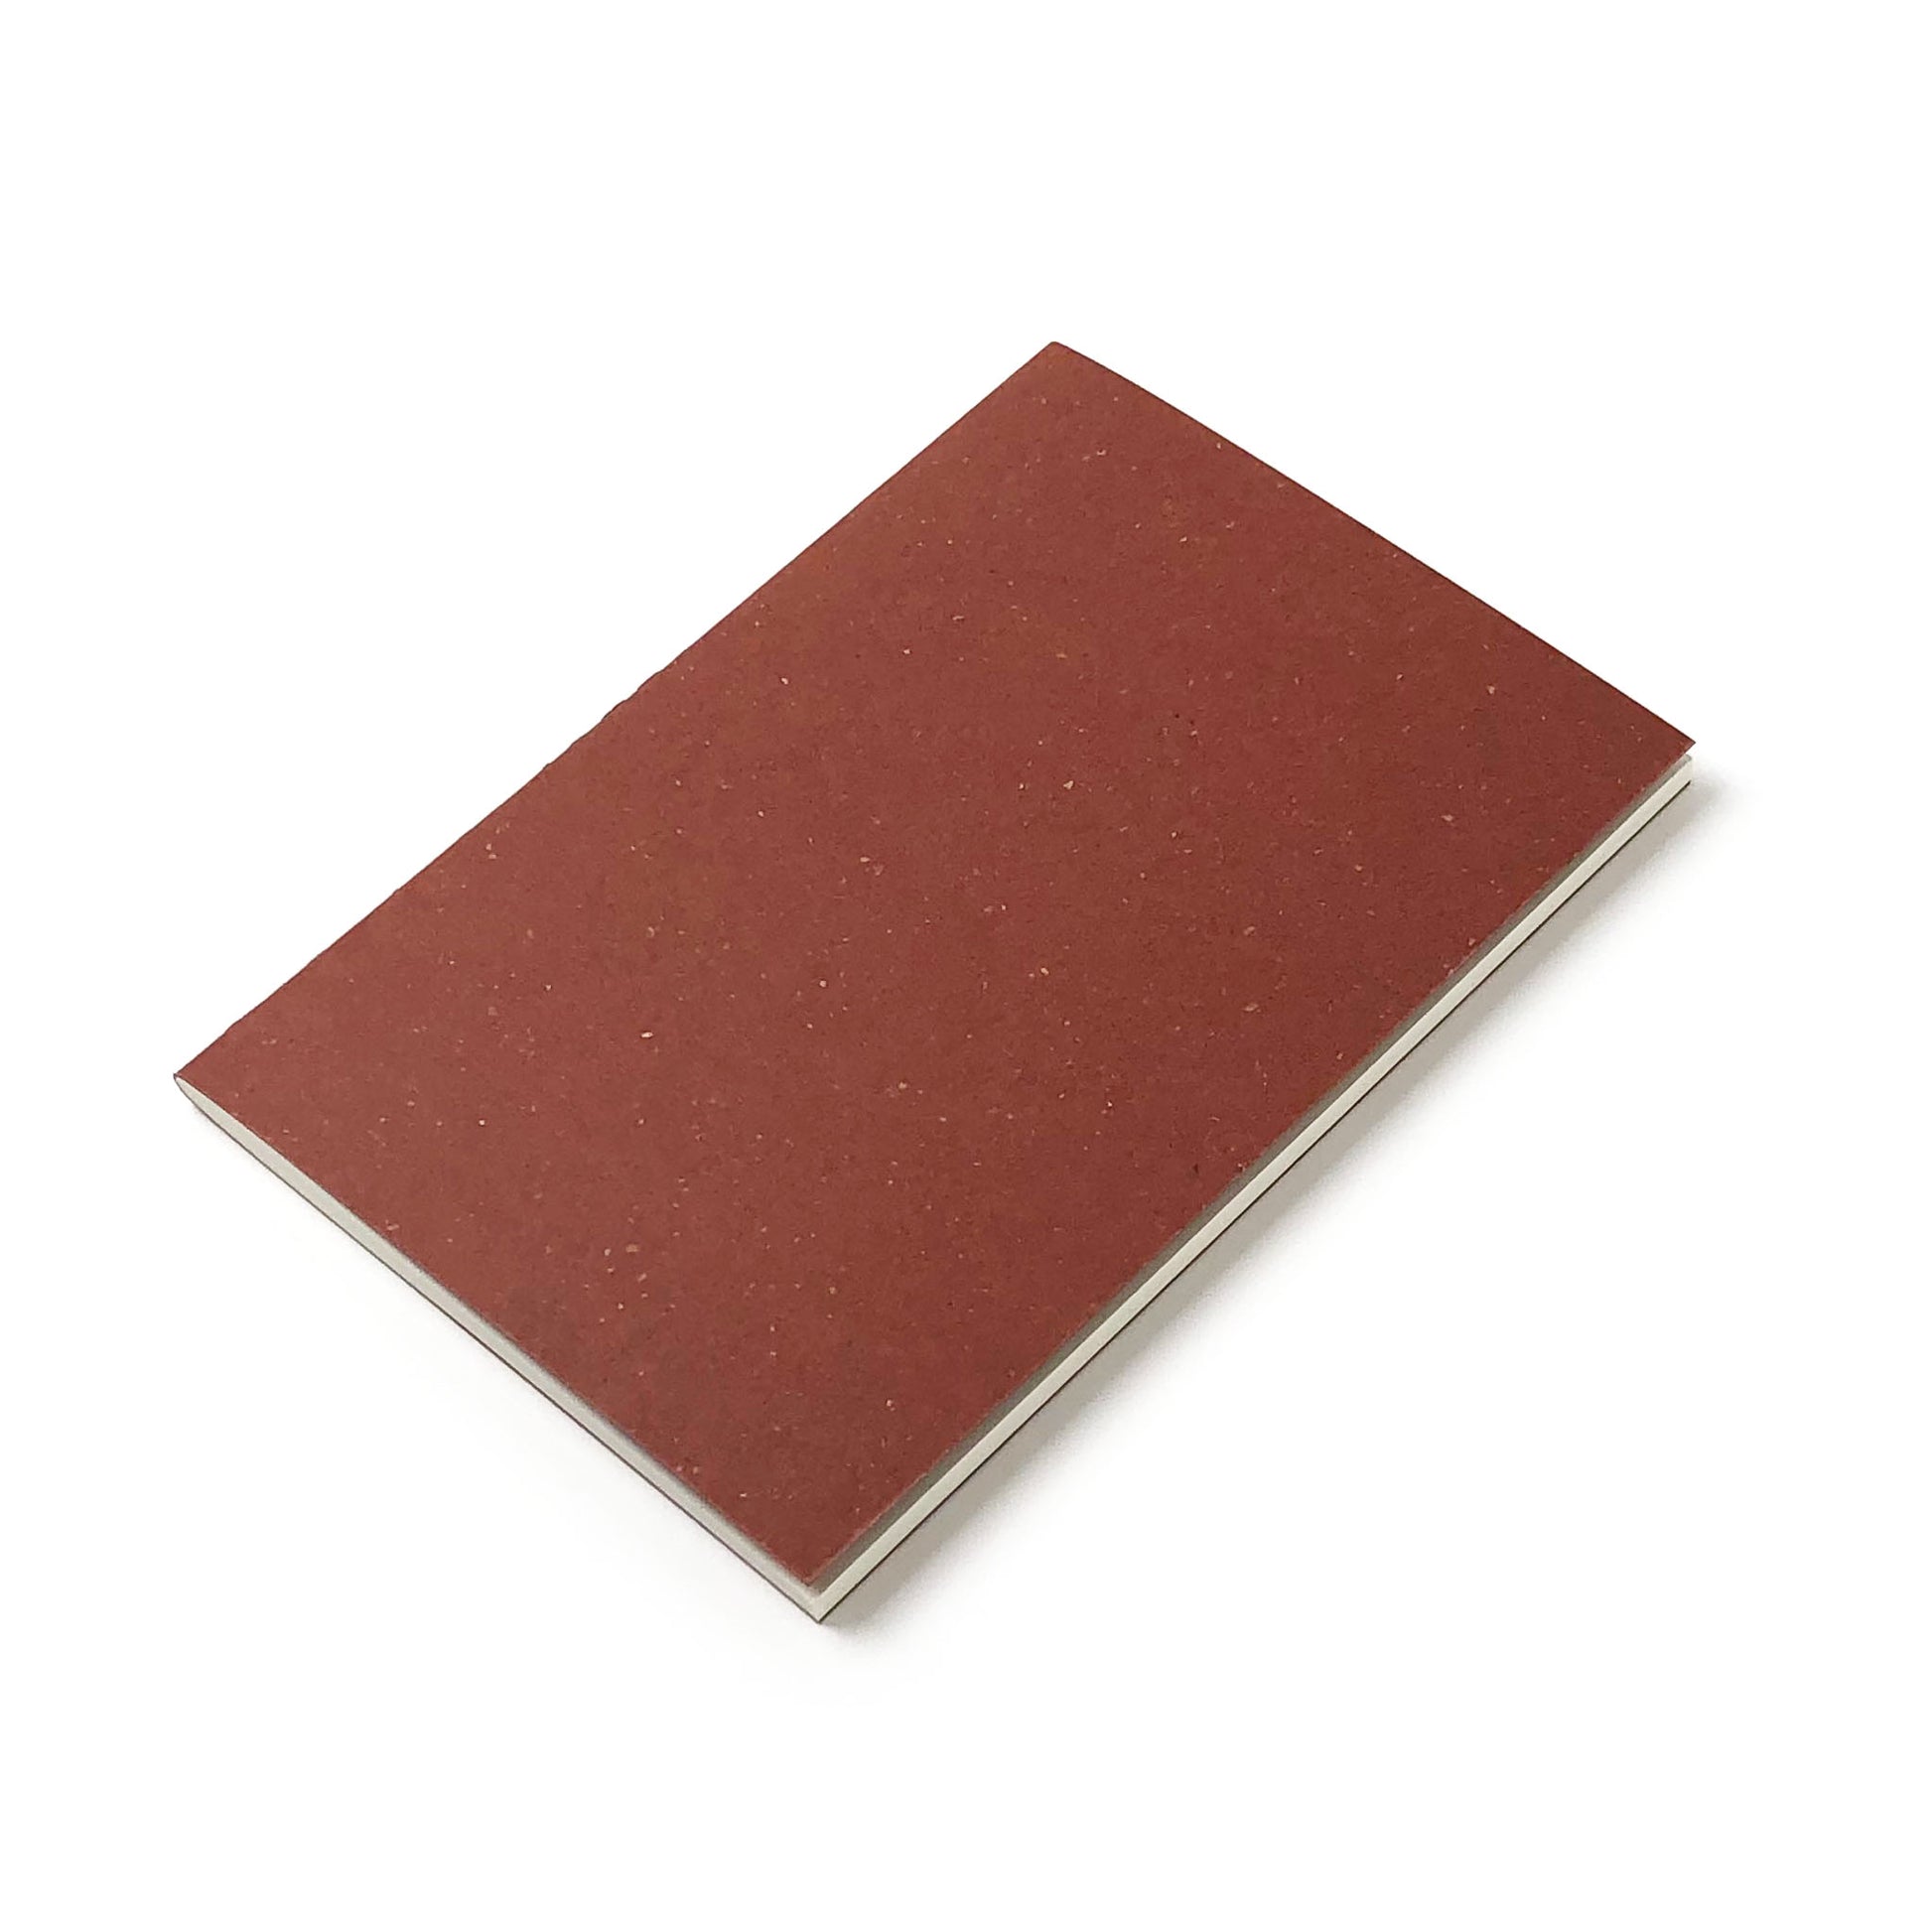 A tilted red-brown notebook with white pages inside against a white background.